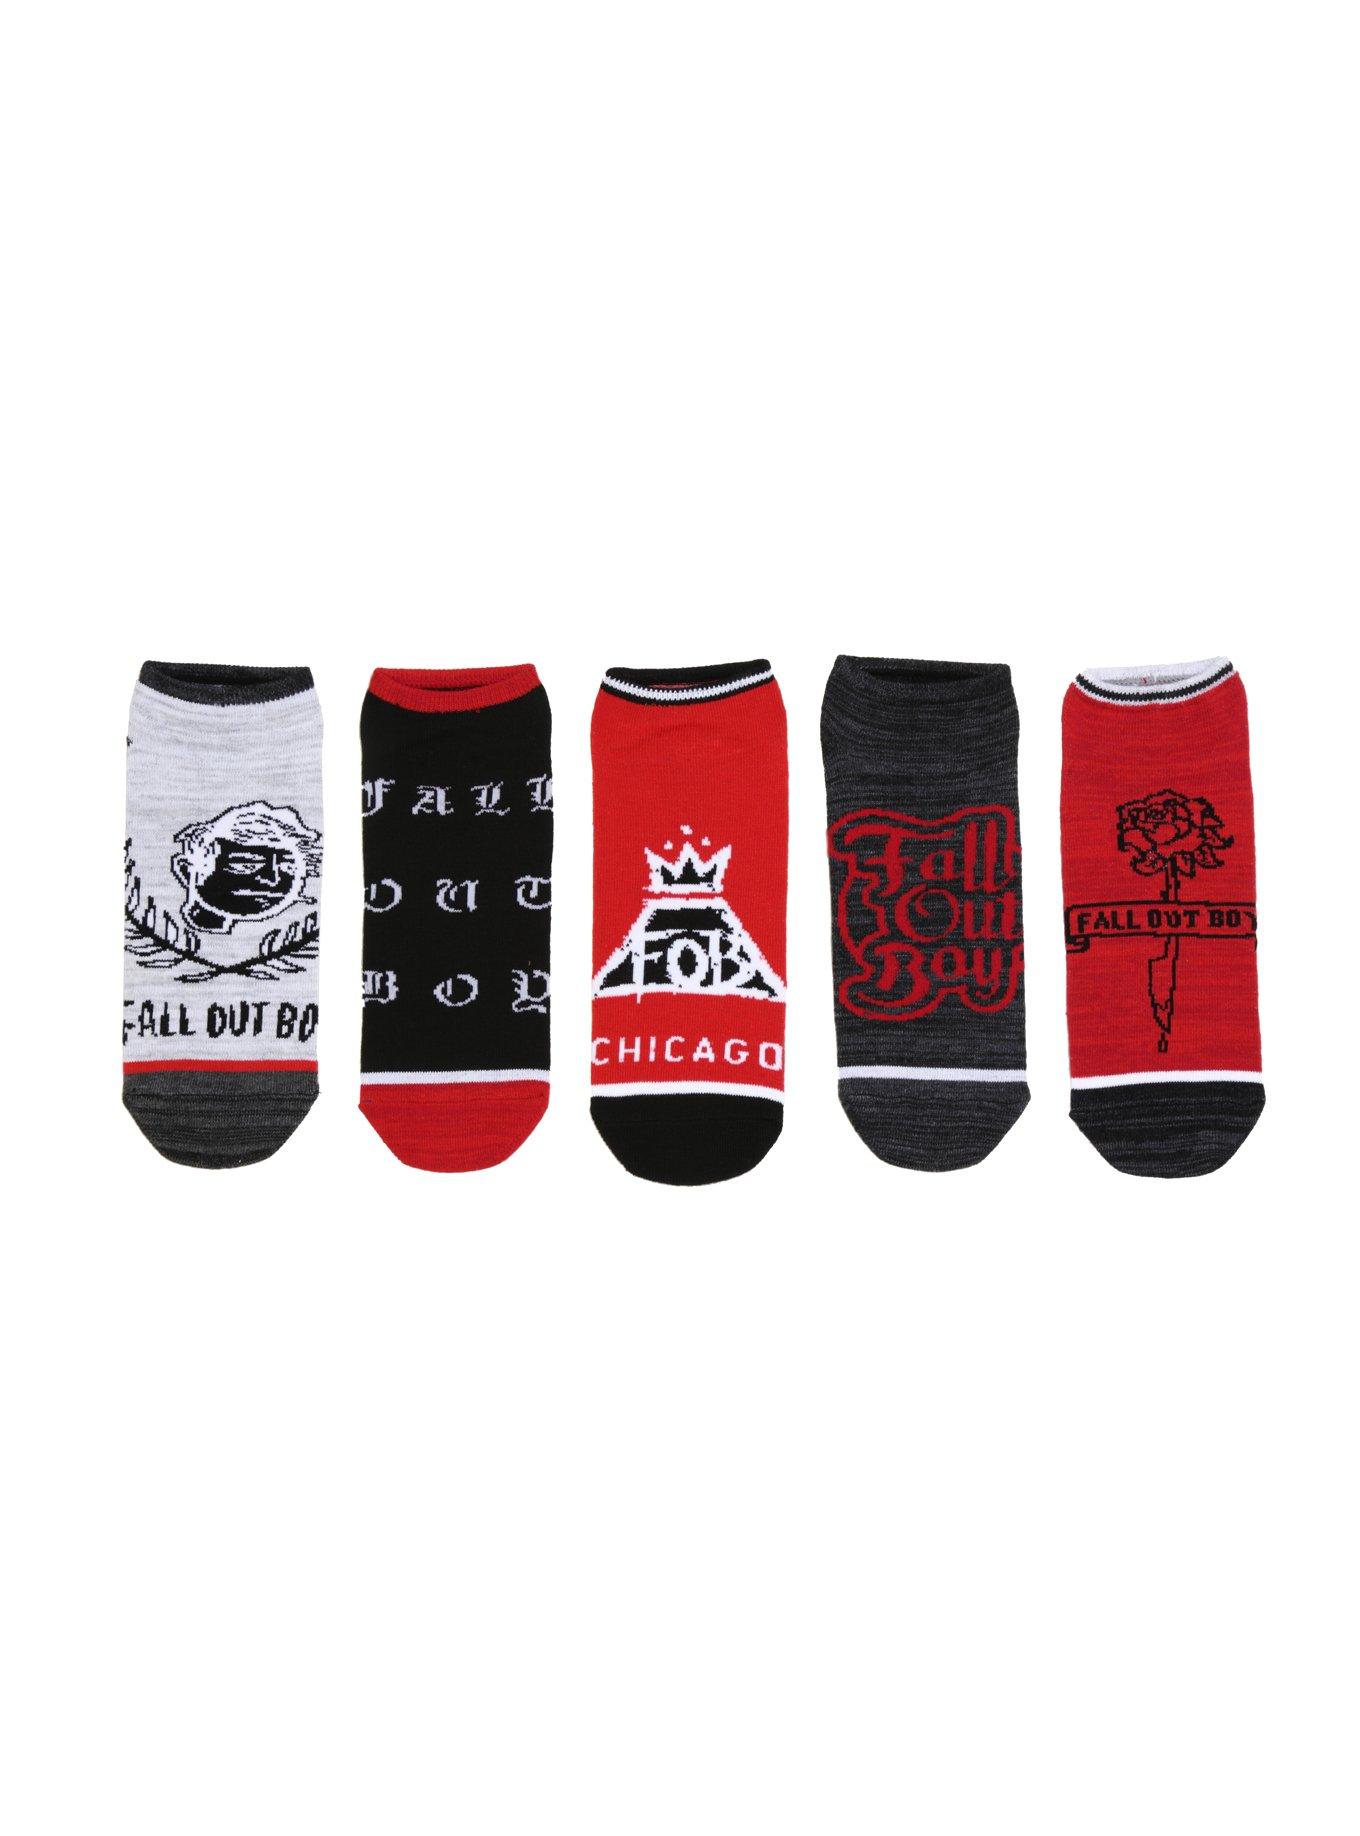 Fall Out Boy Red And Black No-Show Socks 5 Pair | Hot Topic